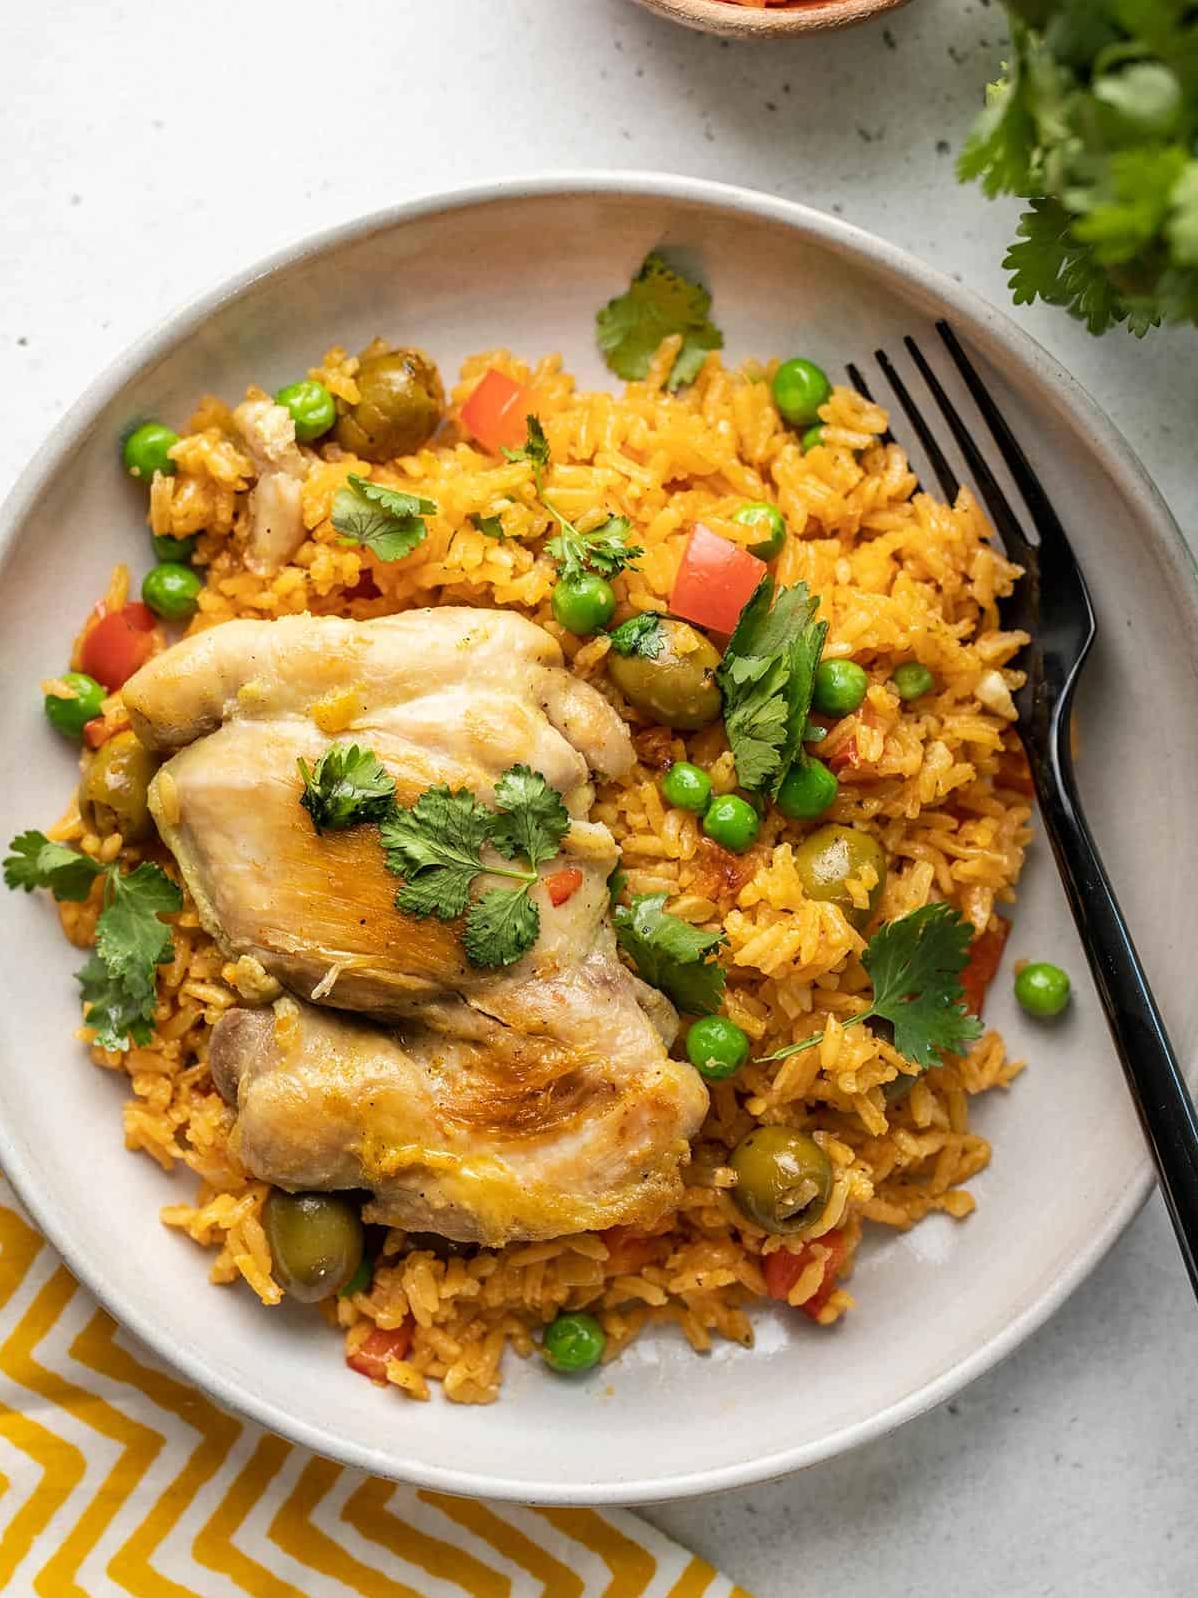  Warm up on a chilly evening with a steaming bowl of Arroz con Pollo.